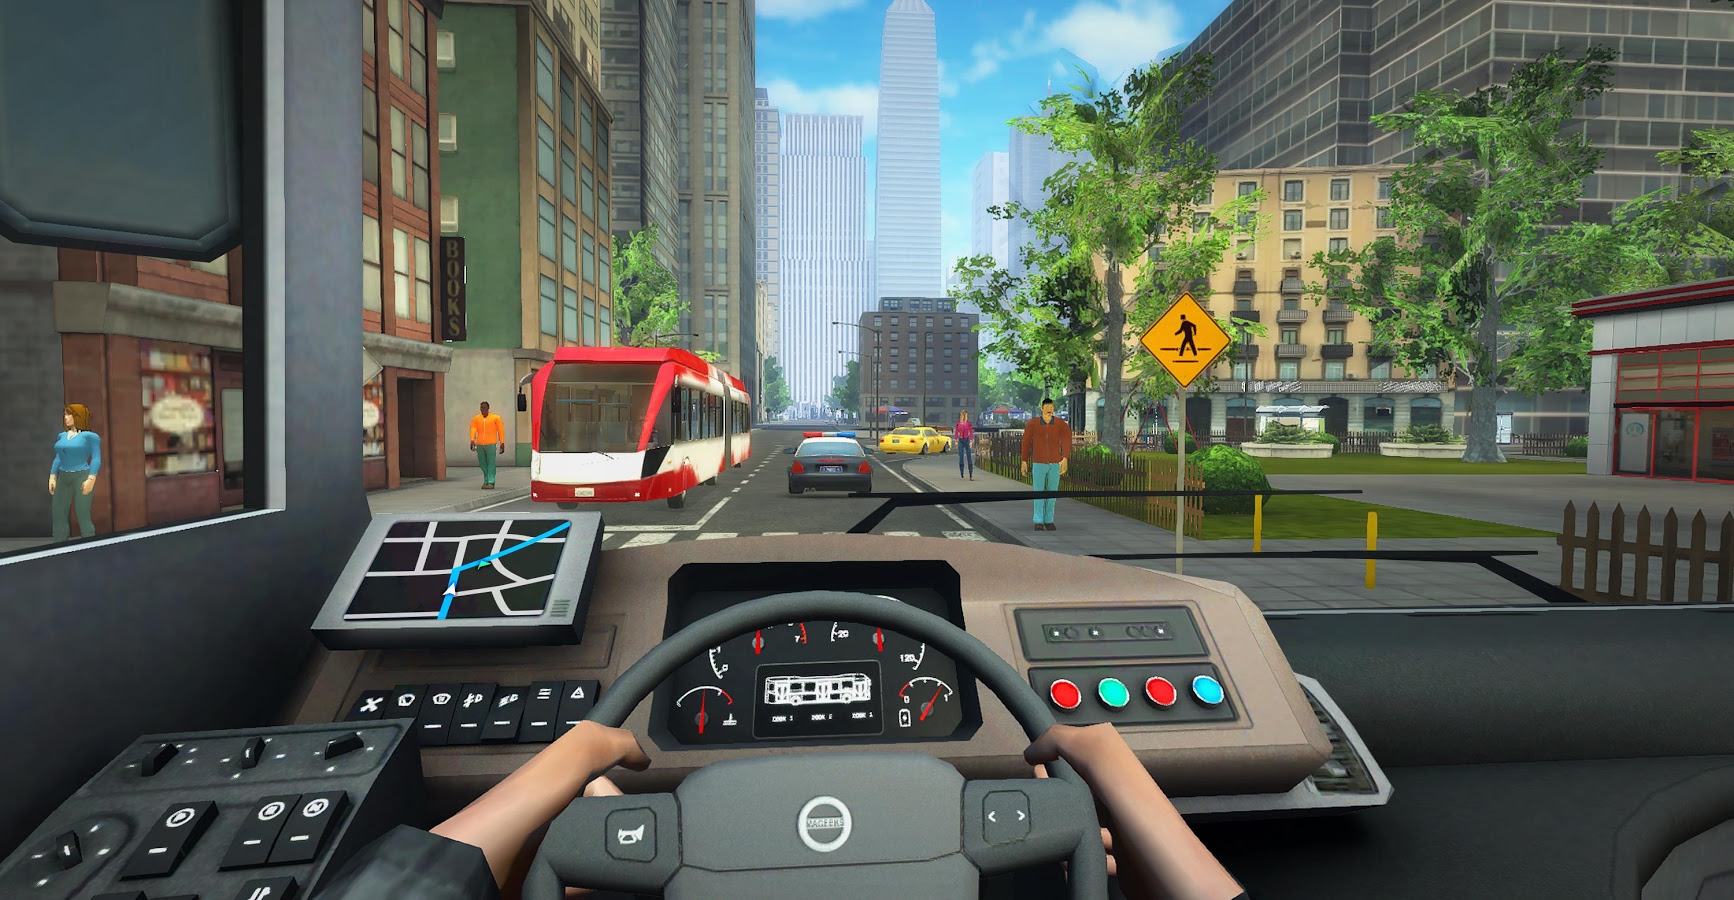 Download Bus Simulator Pro 17 Mod Money 1 6mod Apk For Android Appvn Android